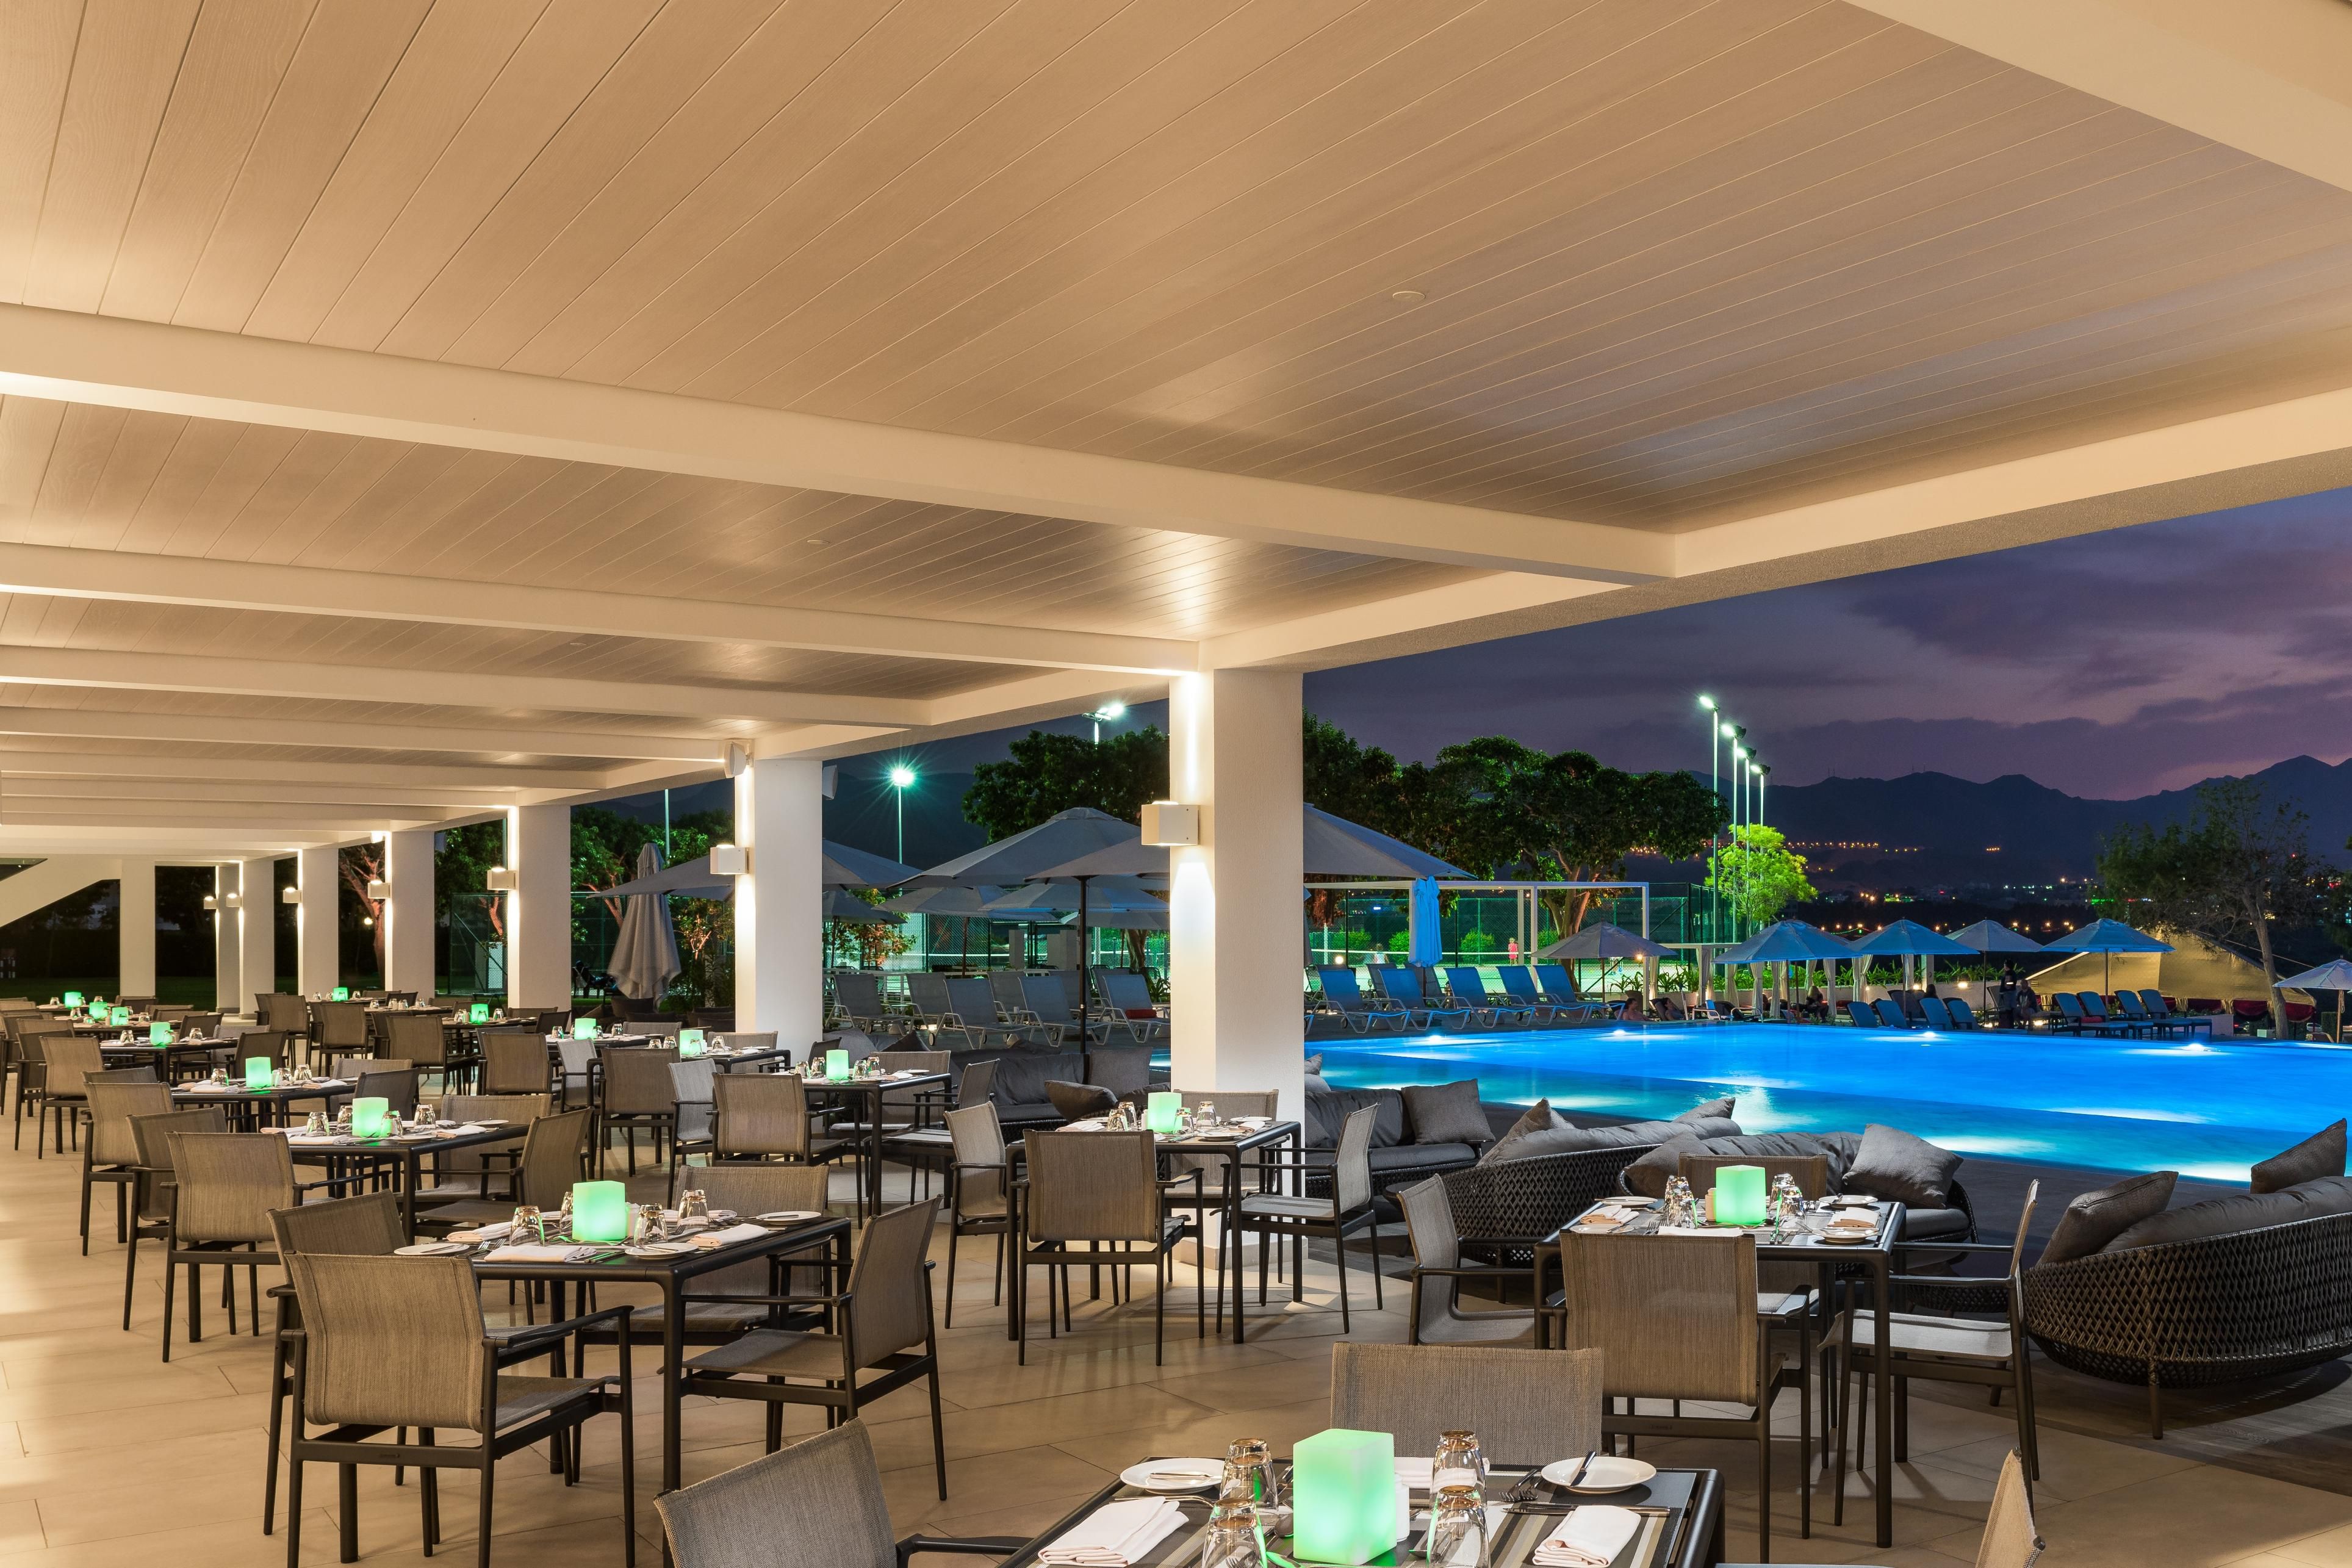 The Restaurant outdoor terrace by evening